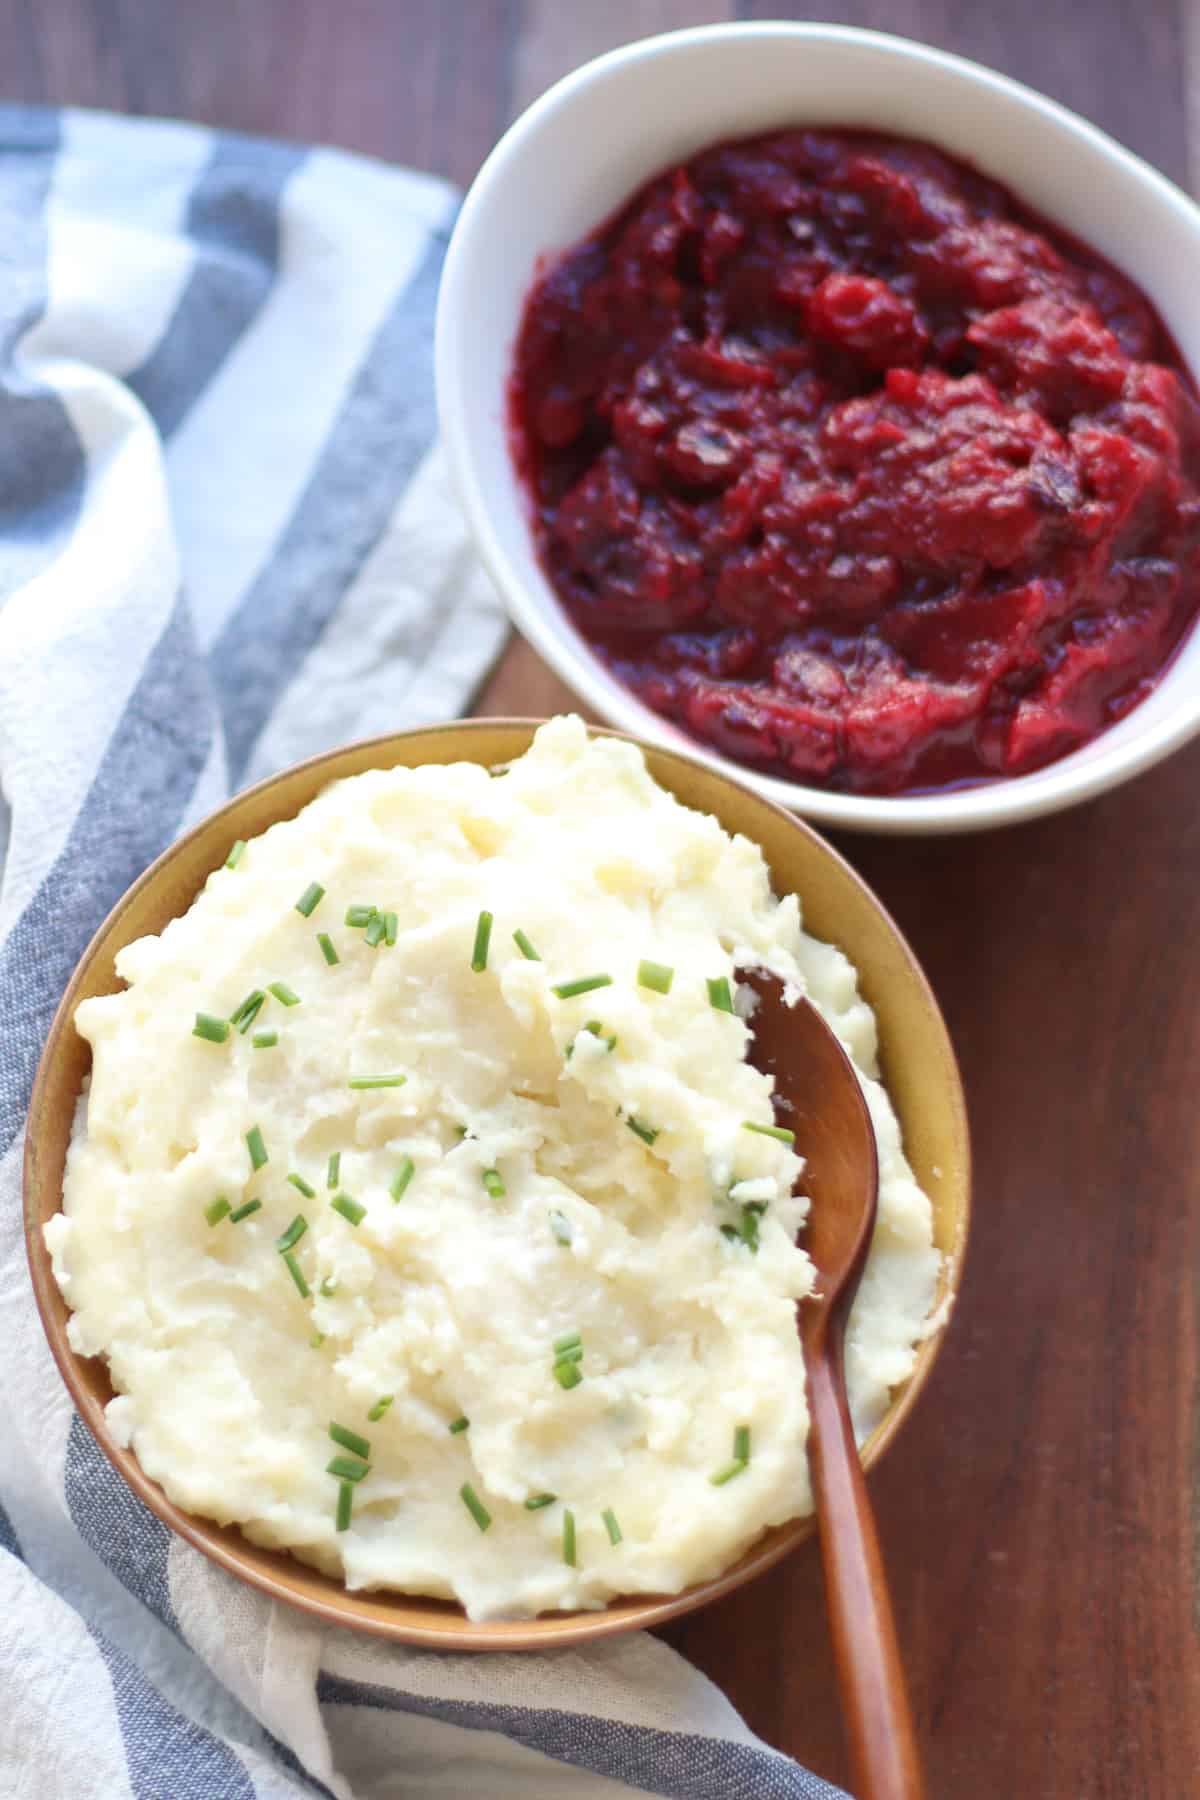 Mashed potatoes in a large bowl and a bowl of cranberry sauce behind it.